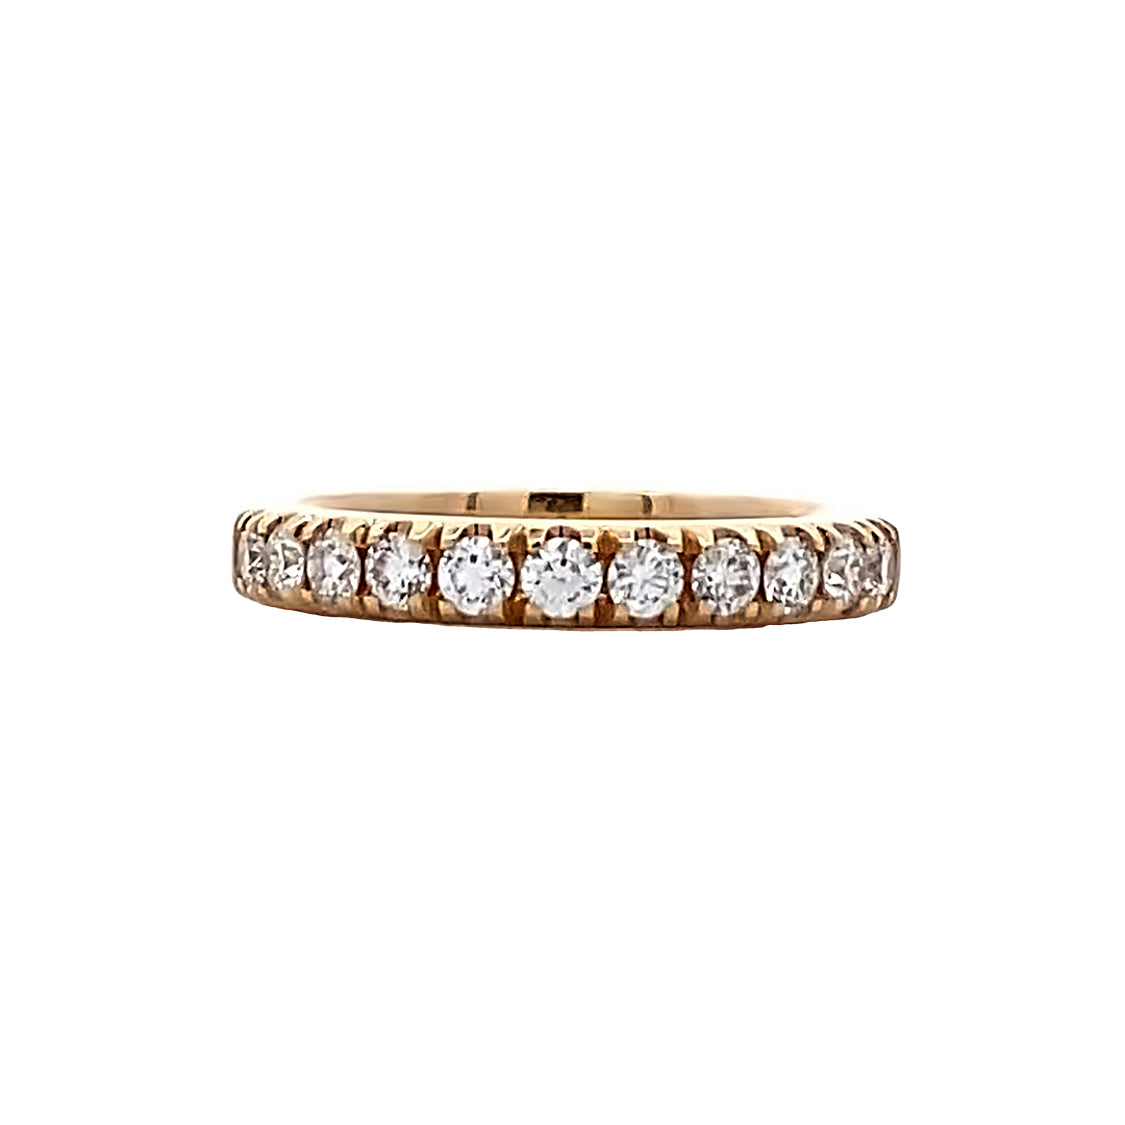 Beeghly & Co. 14 Karat Yellow Gold 1/2 Carat Diamond Band - Women's BCR-7-50Y